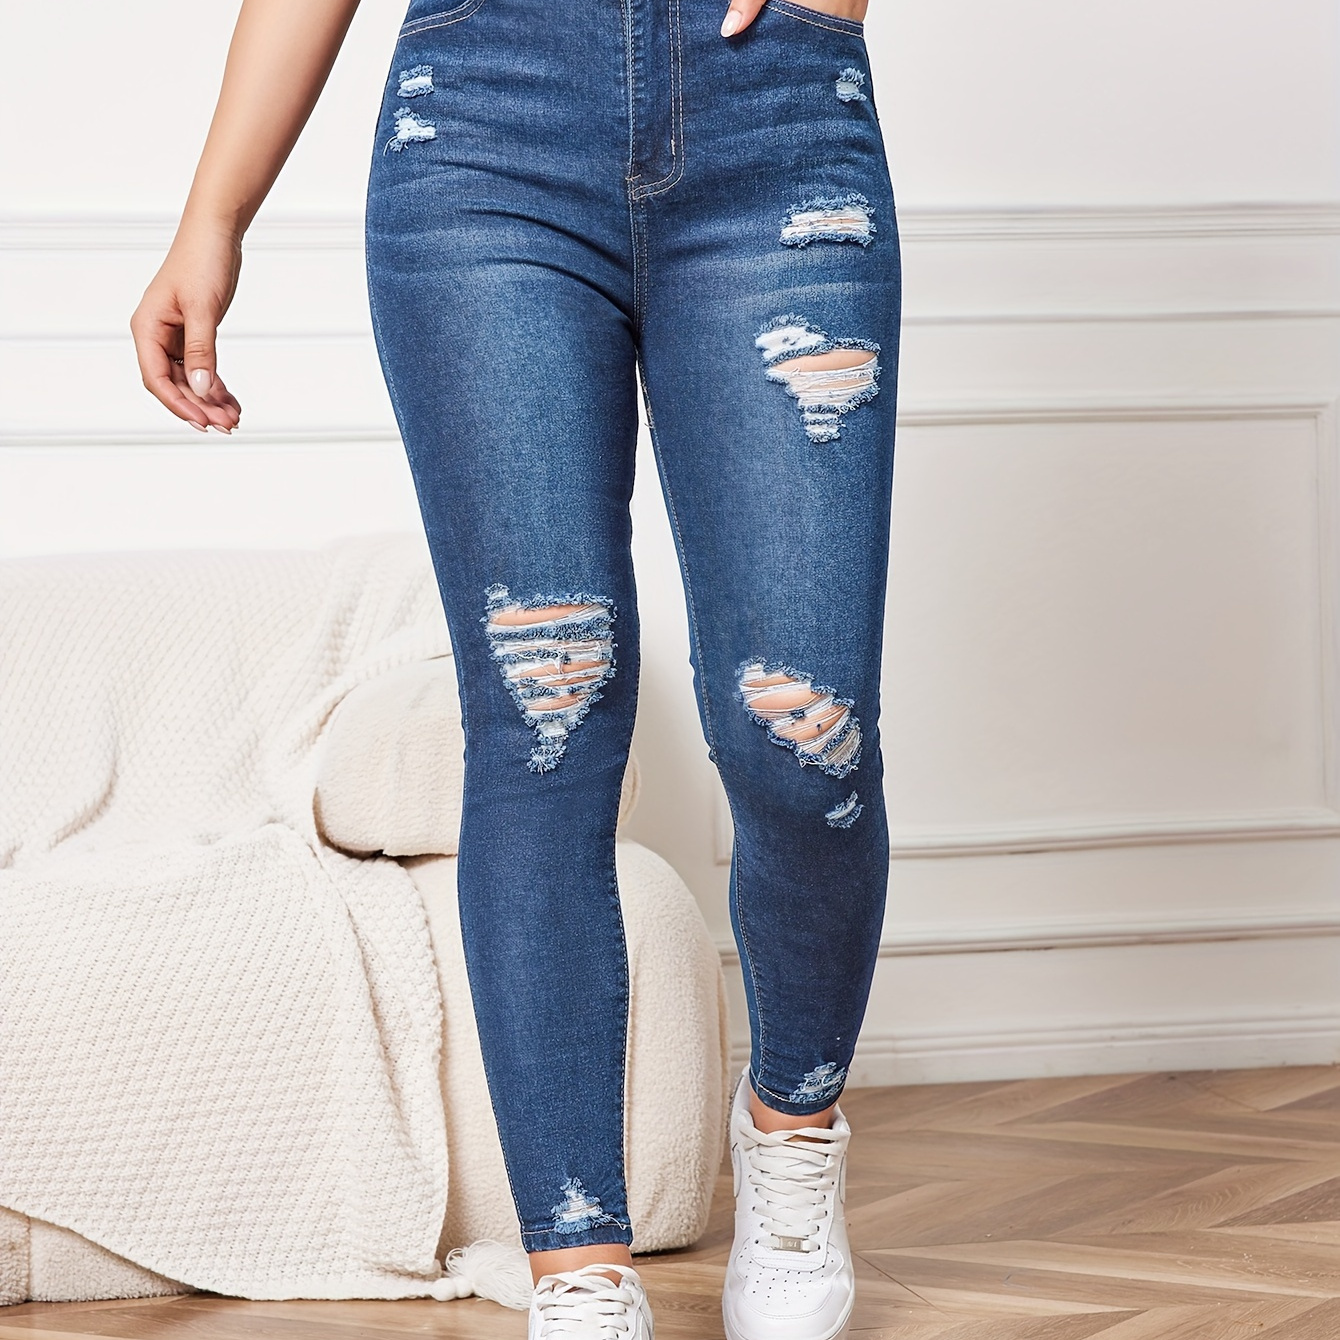 

Women's Fashion High-waist Skinny Jeans, Casual Style, Ripped Denim, Stretch Fit, Full Length Pants